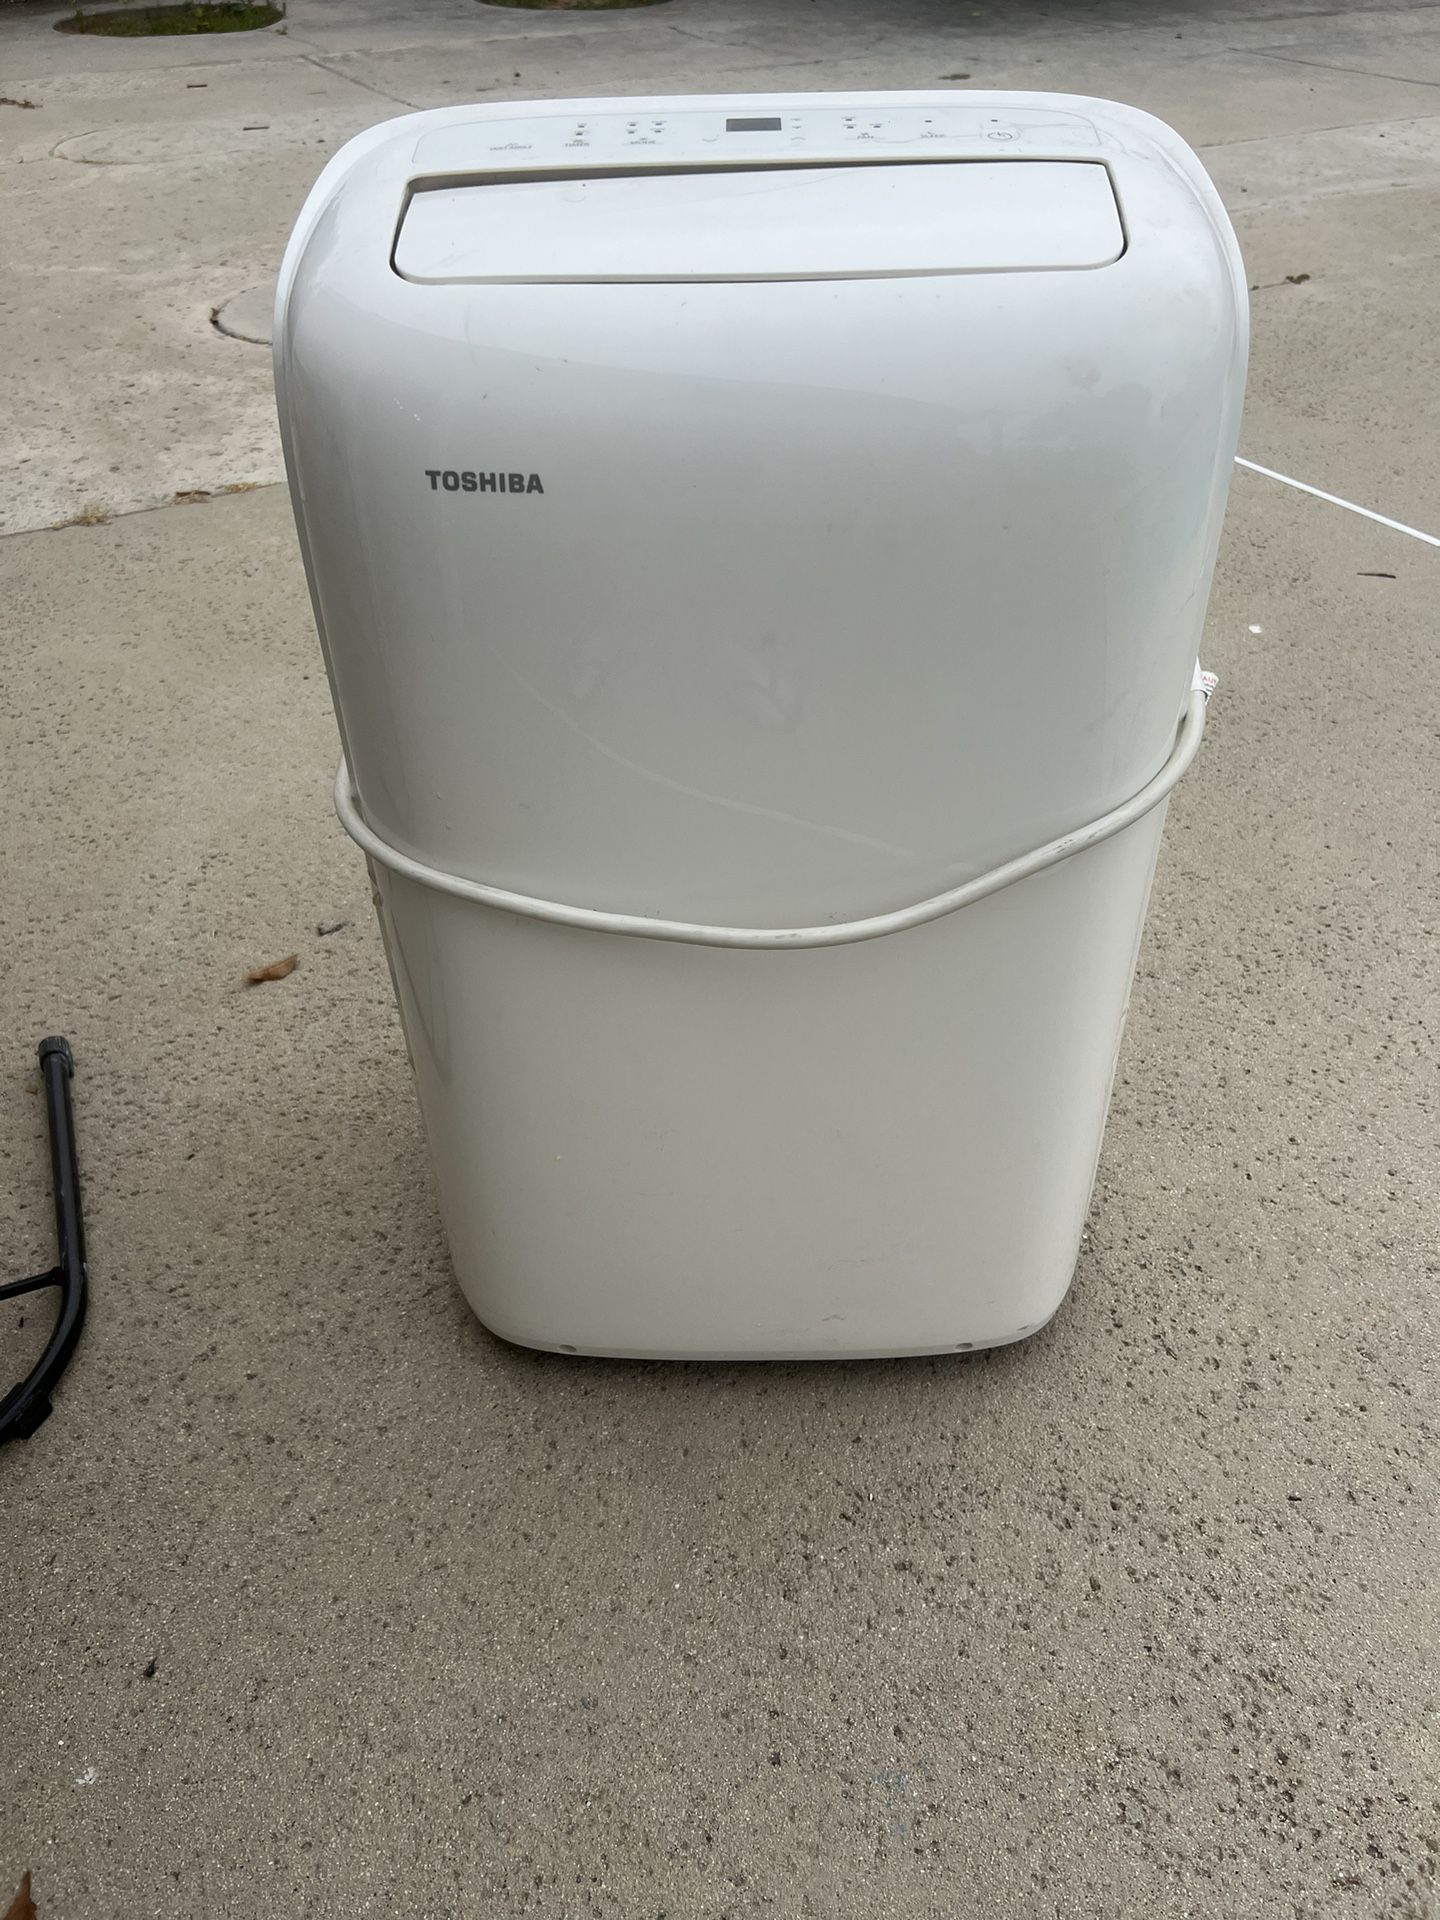 10000 BTU Portable Air Conditioner Cools 350 Sq. Ft. with Dehumidifier 